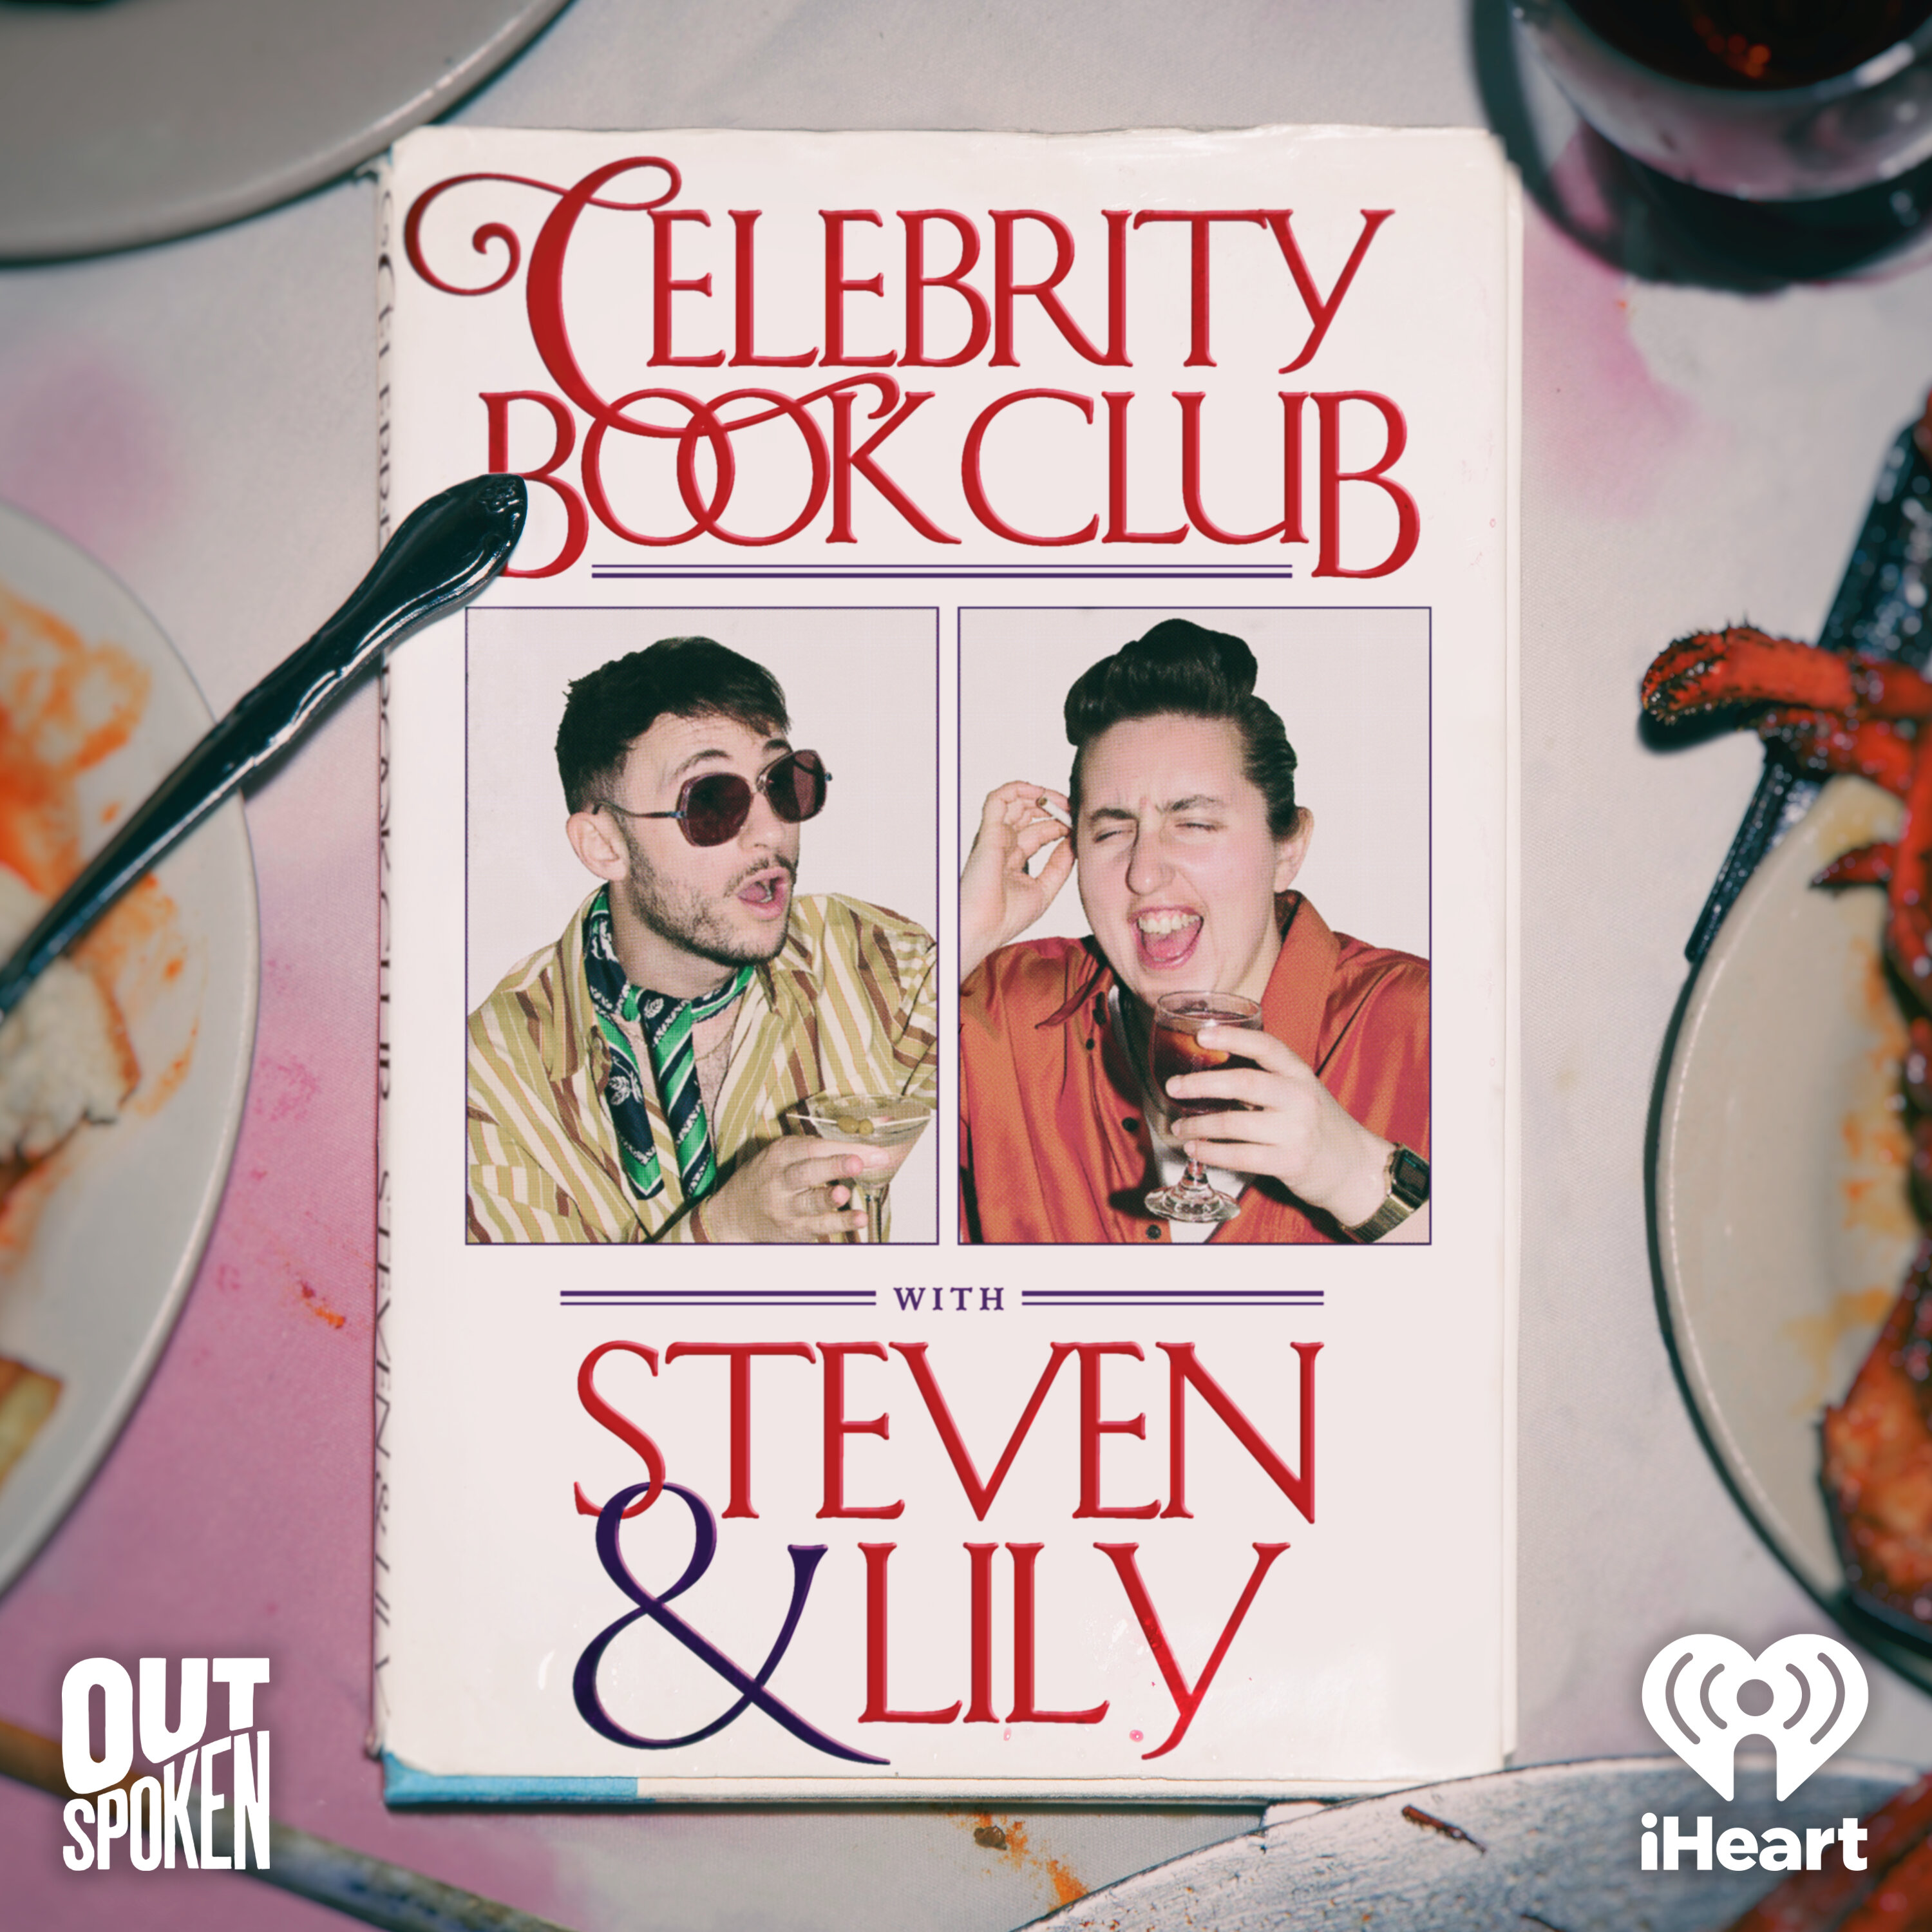 Celebrity Book Club with Steven & Lily podcast show image